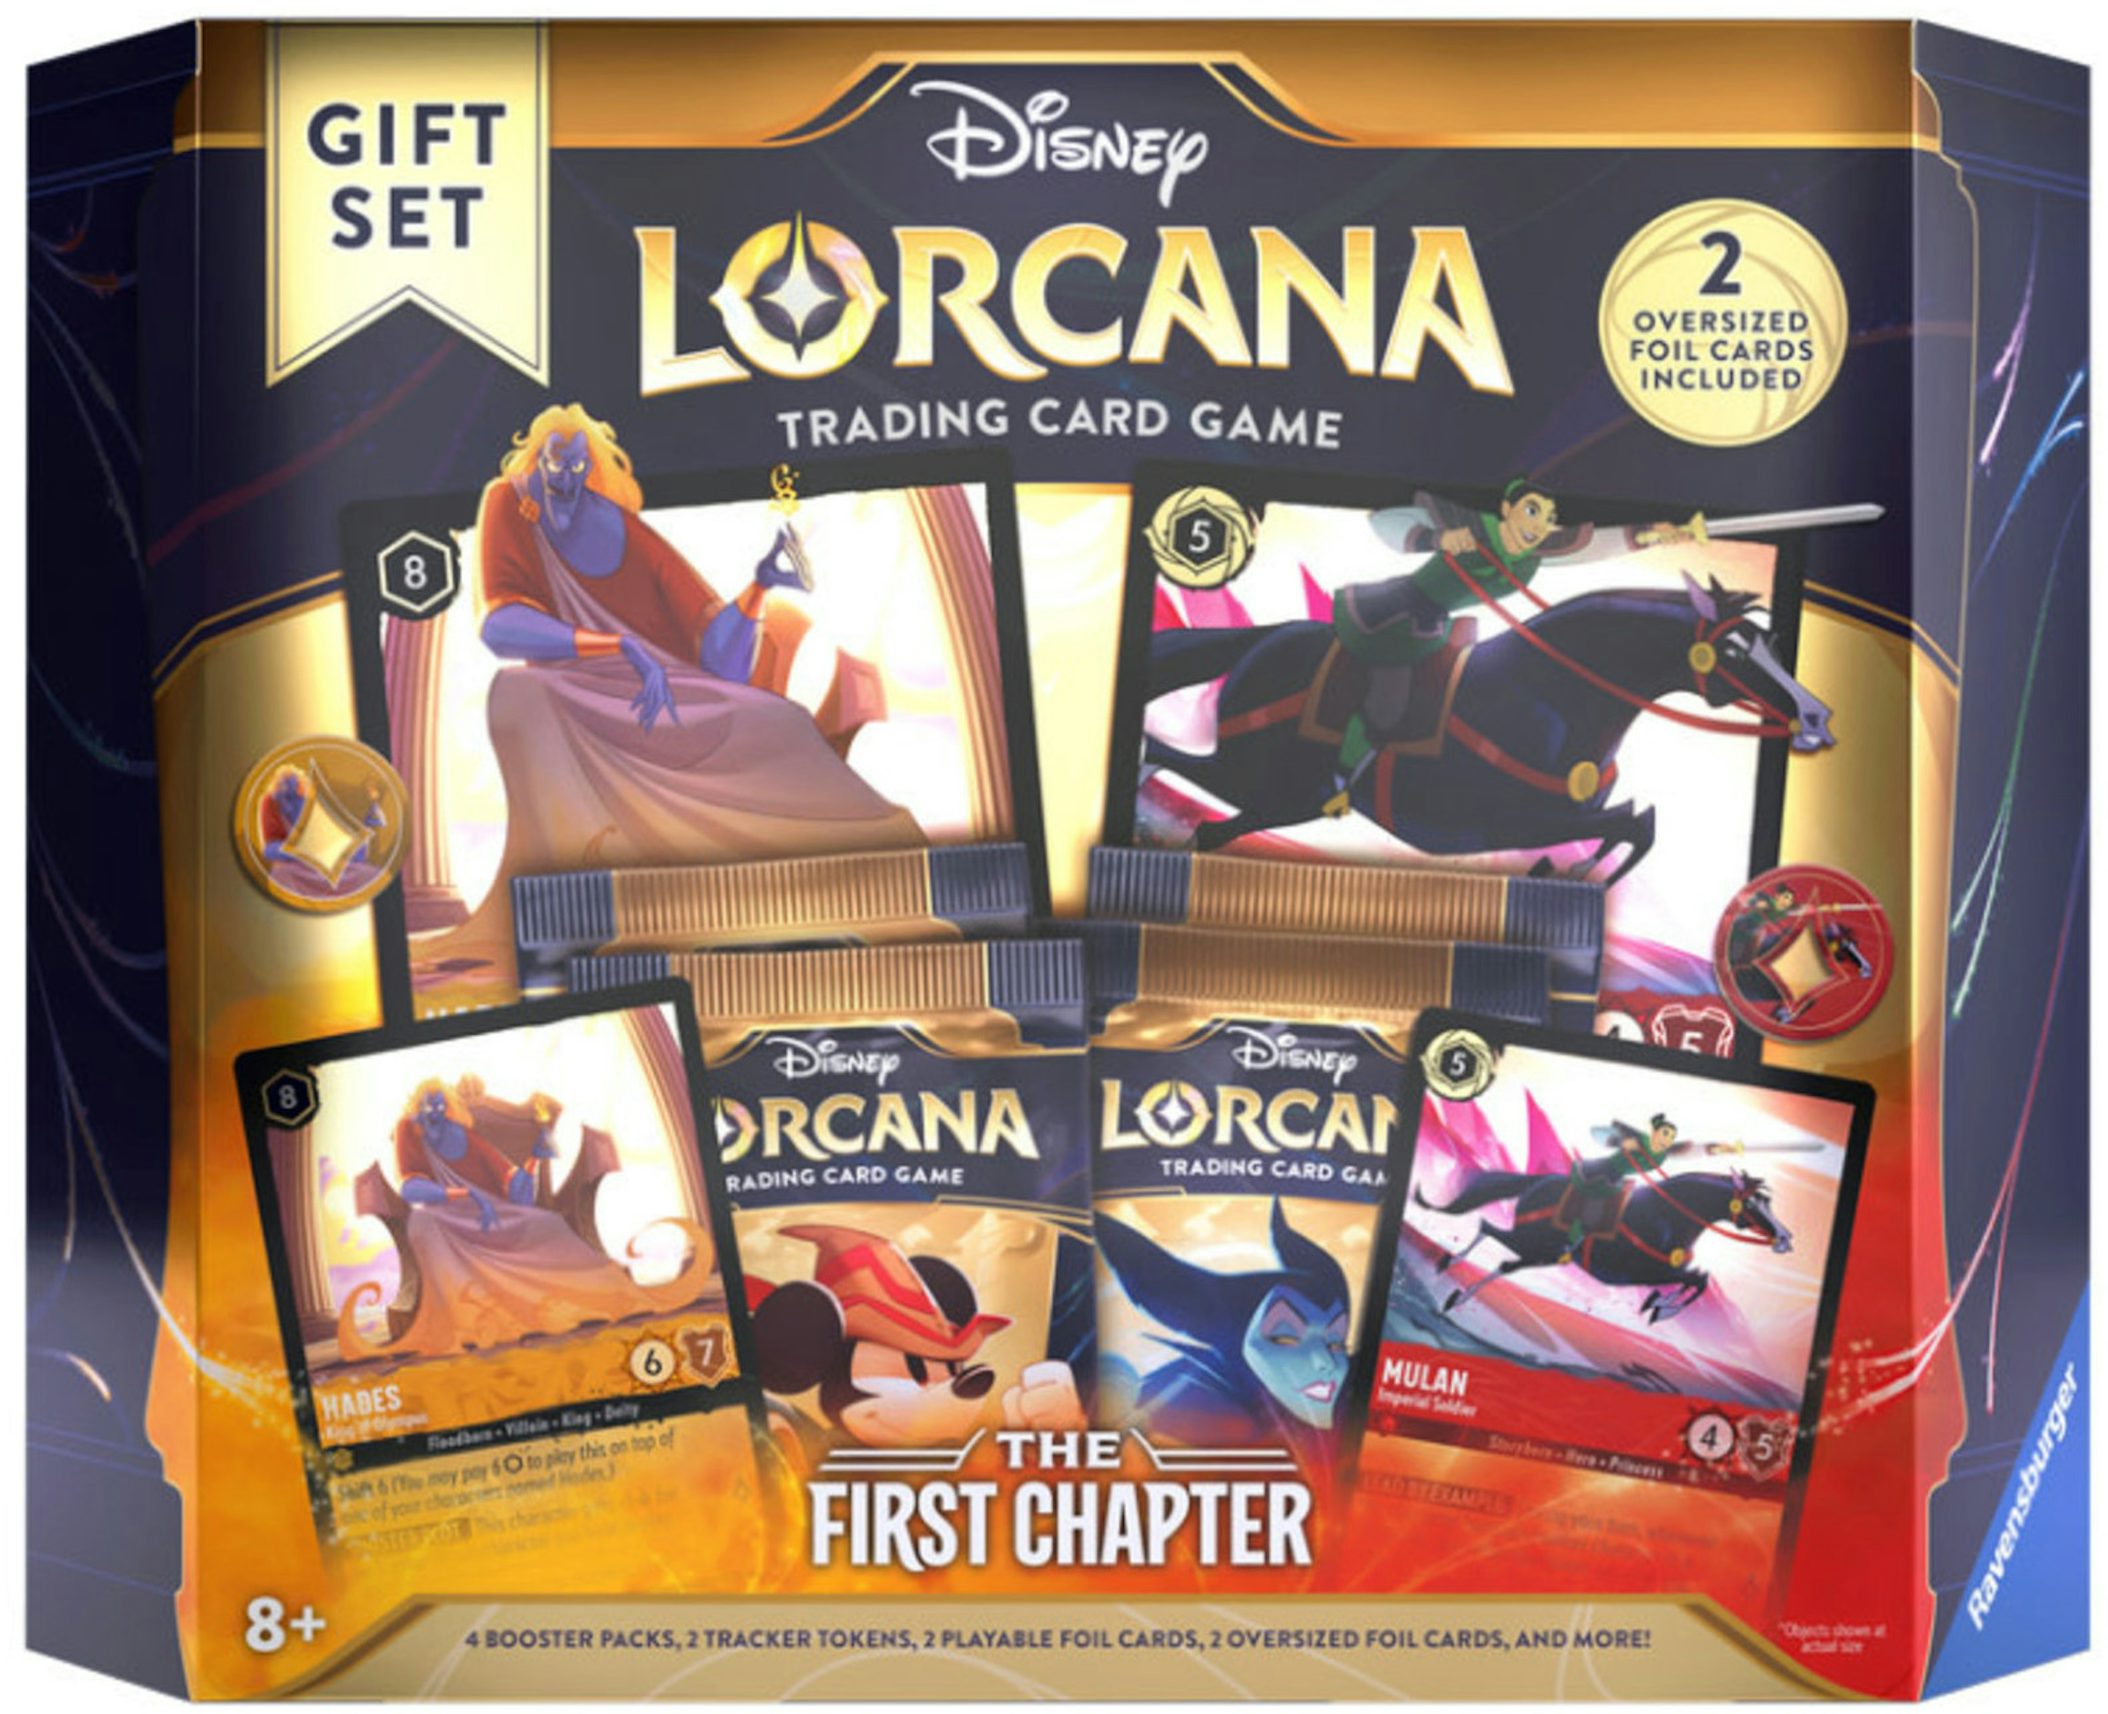 https://images.stockx.com/images/Disney-Lorcana-TCG-The-First-Chapter-Gift-Set.jpg?fit=fill&bg=FFFFFF&w=1200&h=857&fm=jpg&auto=compress&dpr=2&trim=color&updated_at=1688769274&q=60